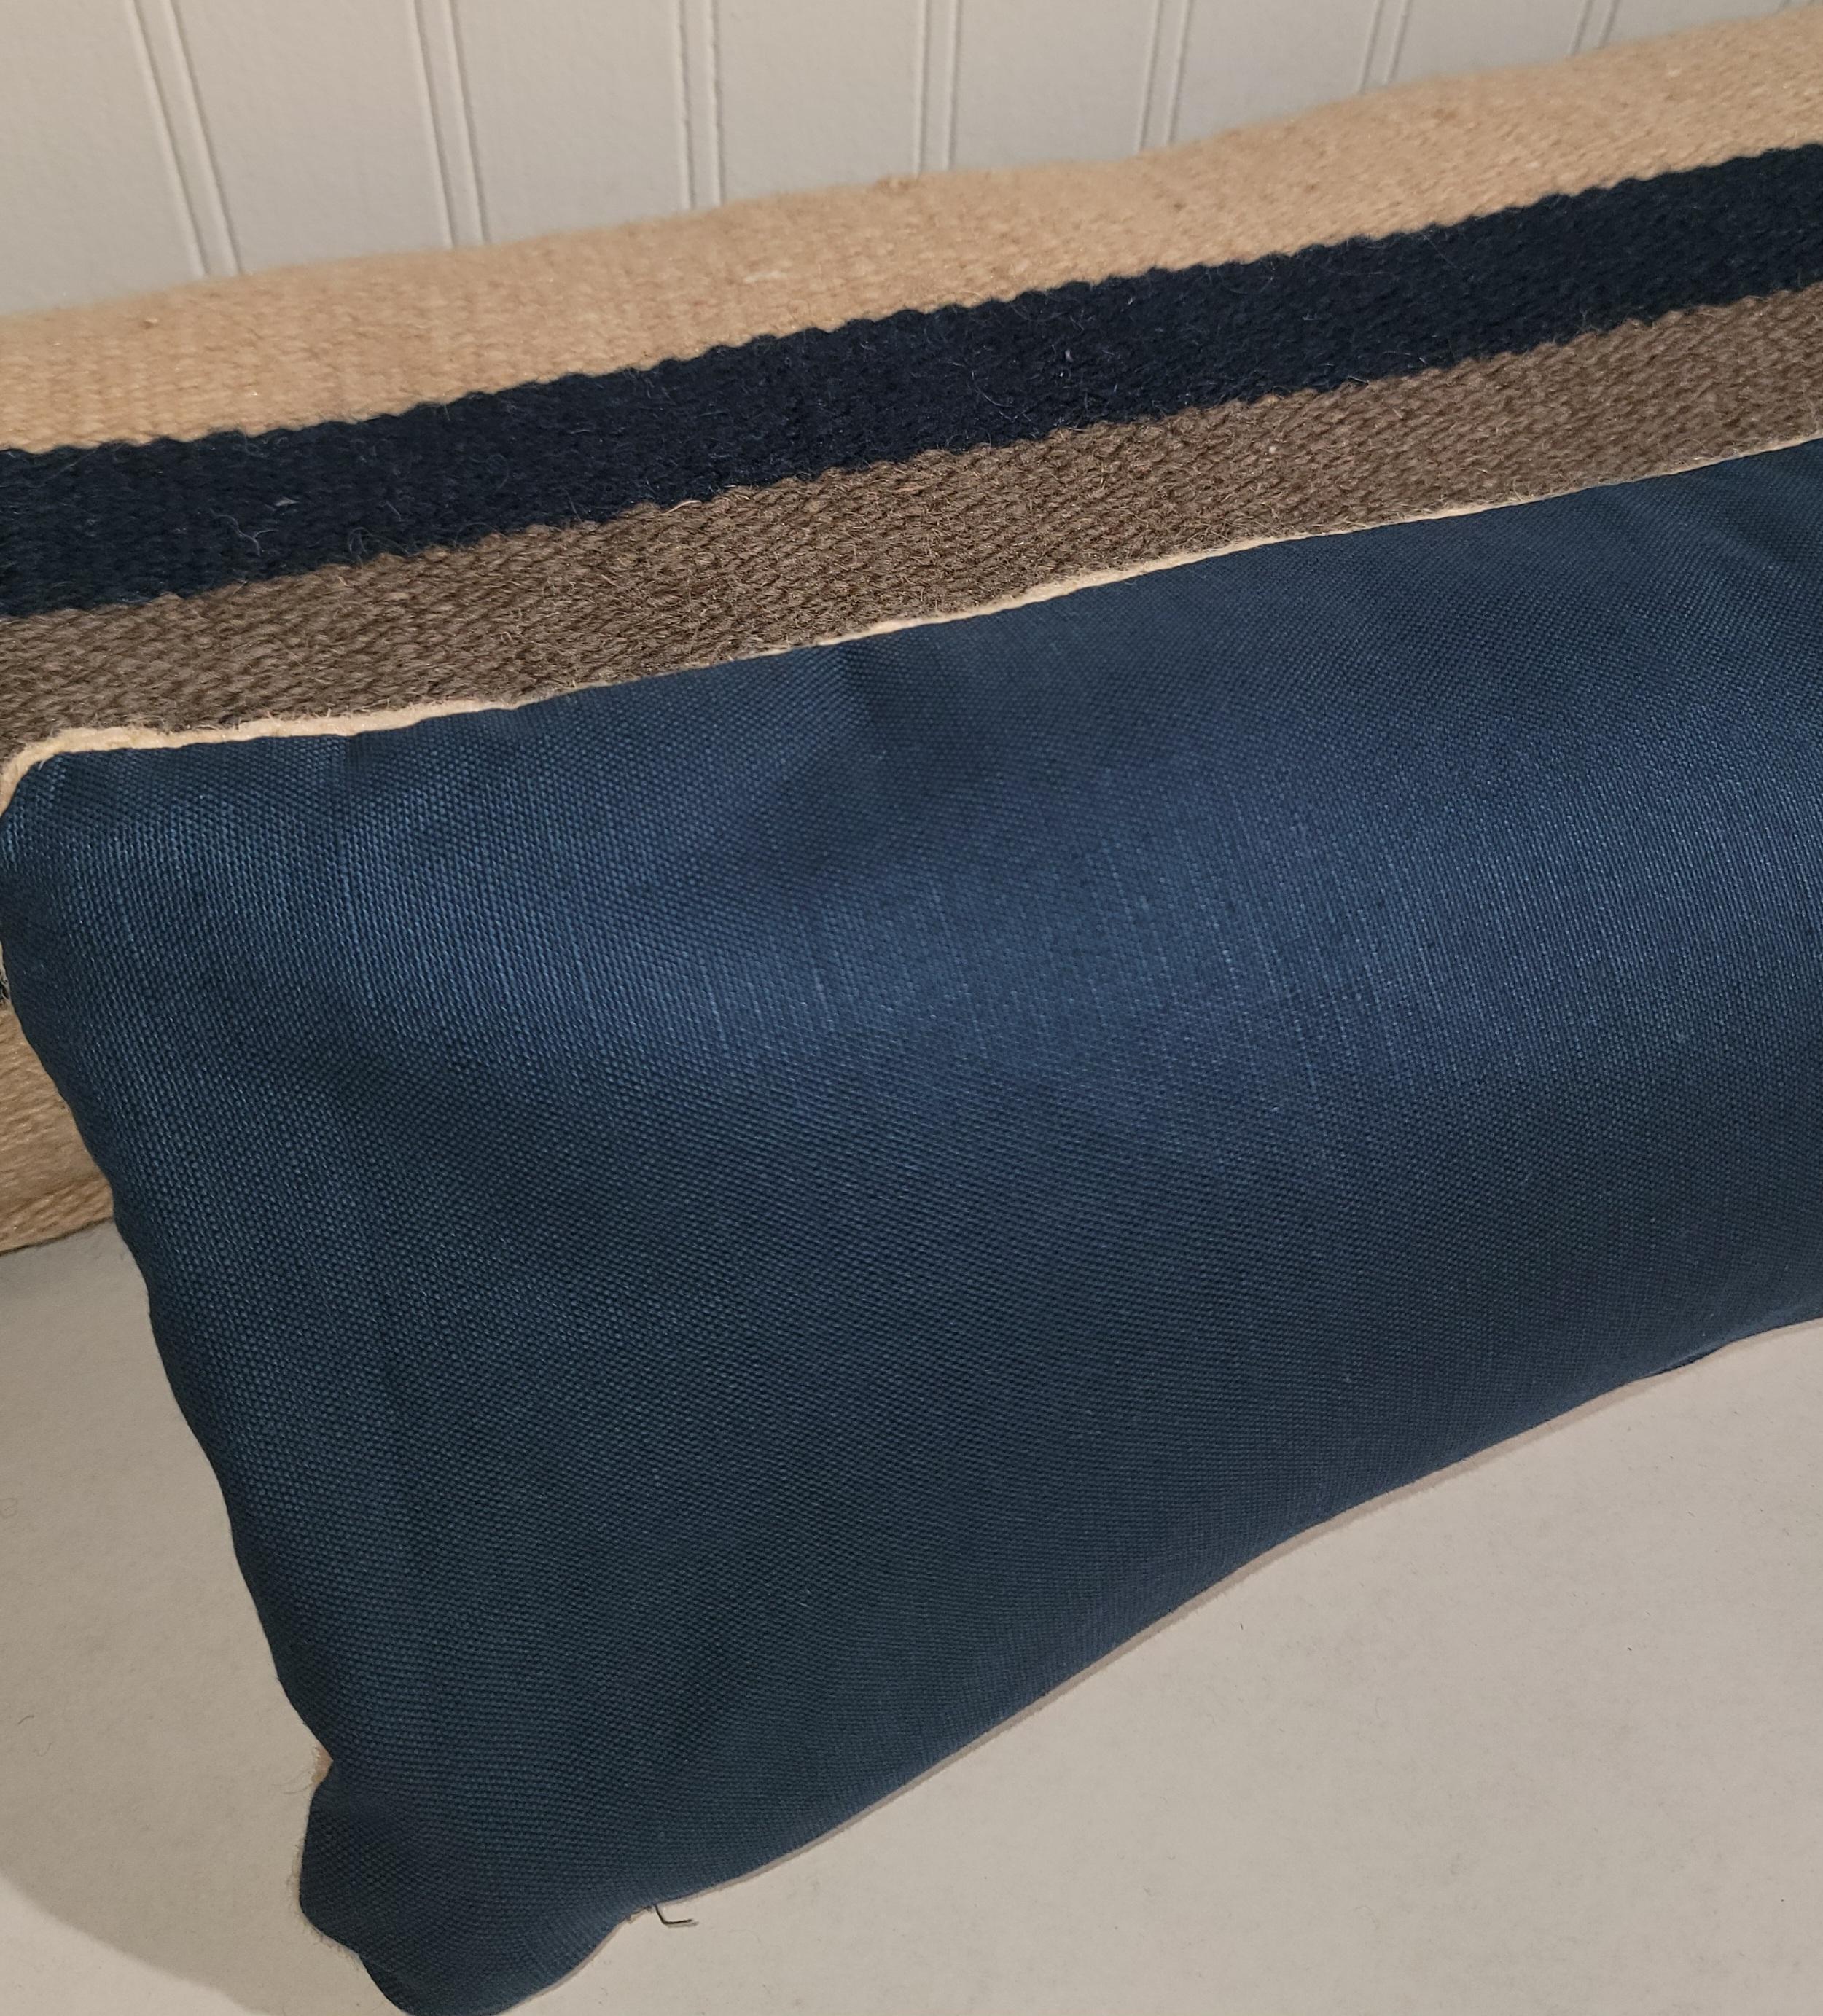 Elongated Mexican American weaving pillows with wonderful blue white and gray colors. The back is made from a vintage linen. This elongated pillow has a custom made down and feather insert. The stripes are clean lined and are subtle, do not